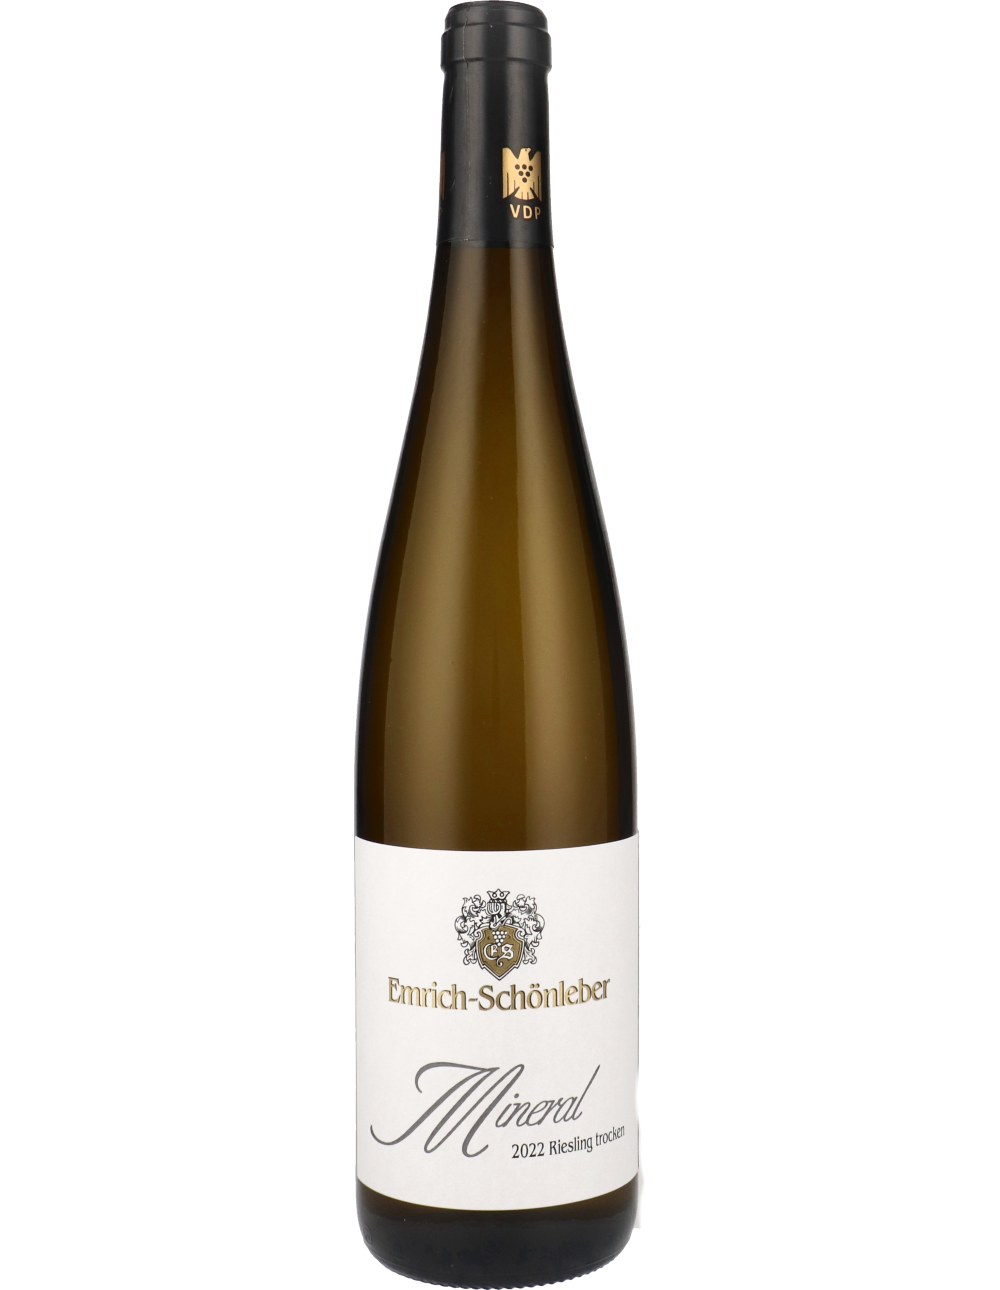 Mineral Riesling